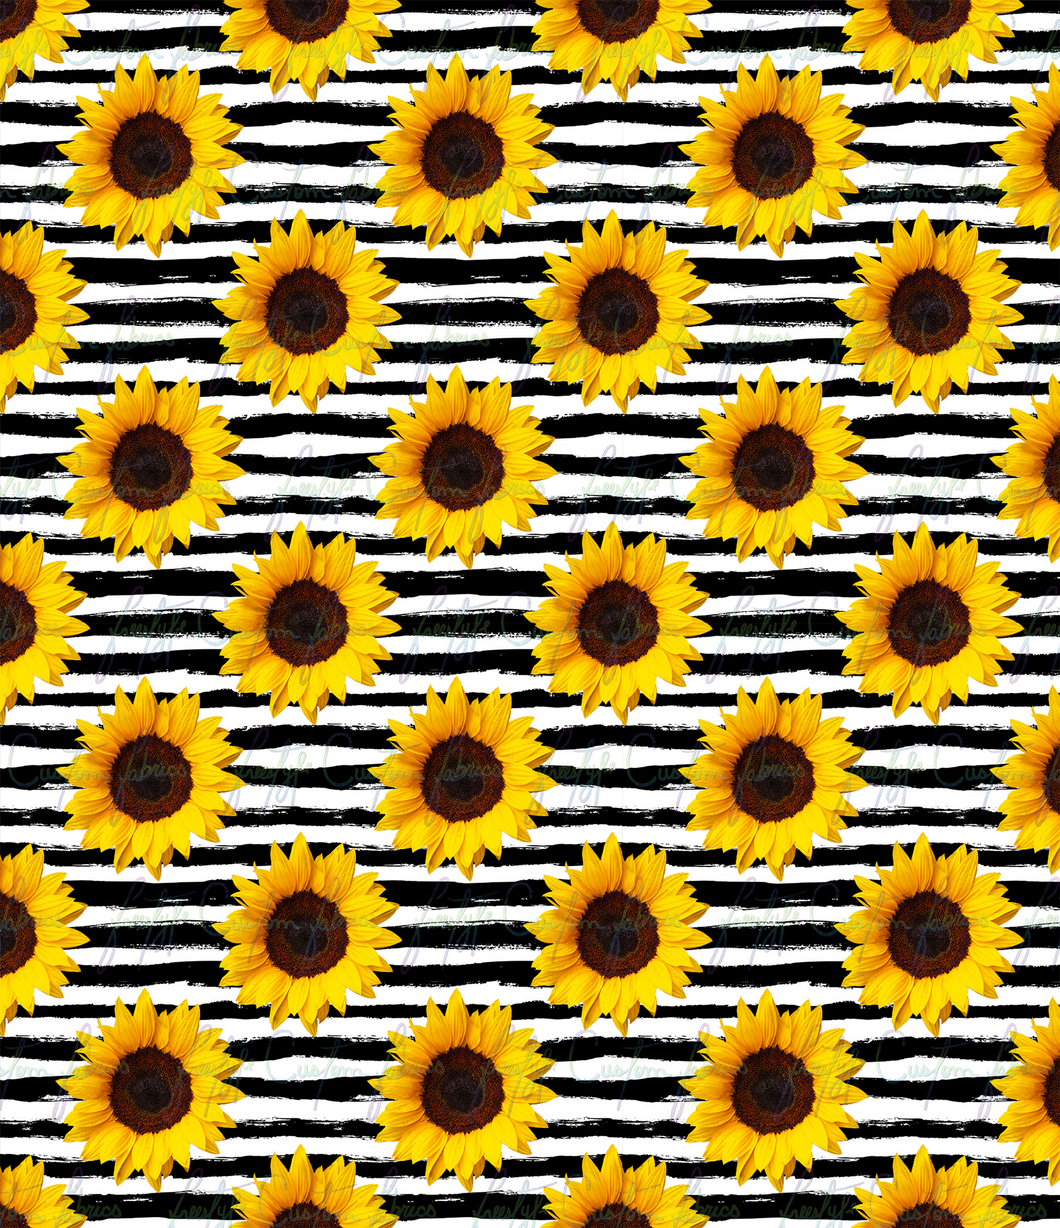 Stripped Sunflowers